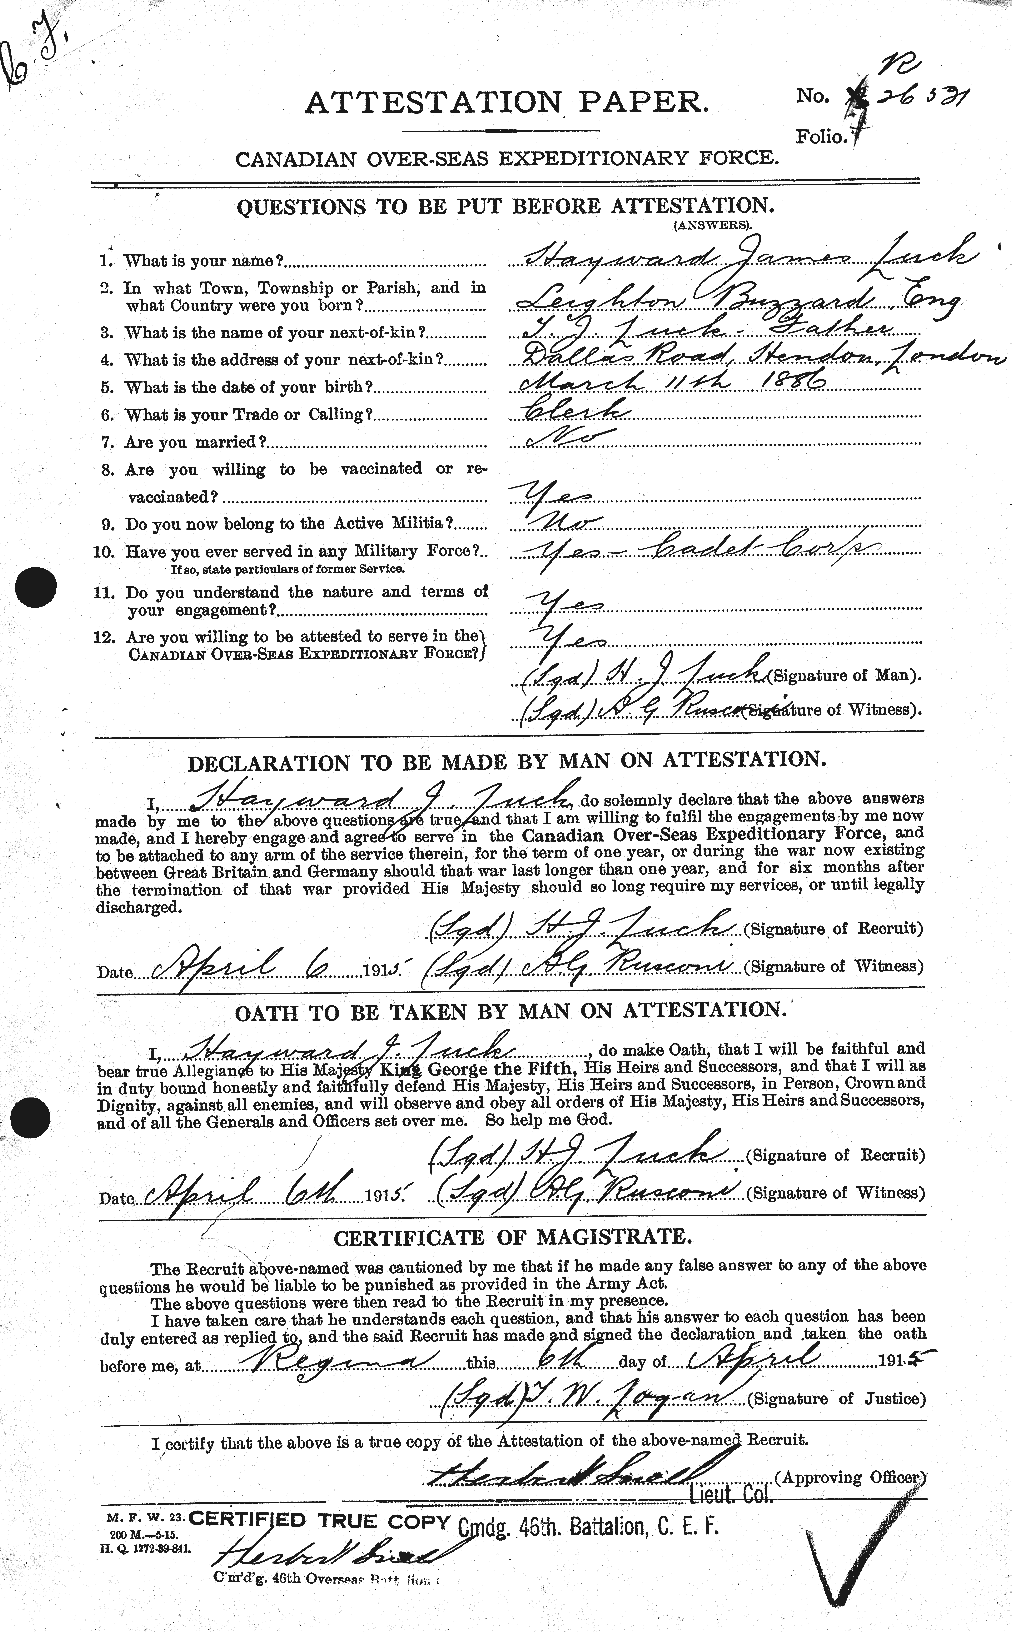 Personnel Records of the First World War - CEF 480336a